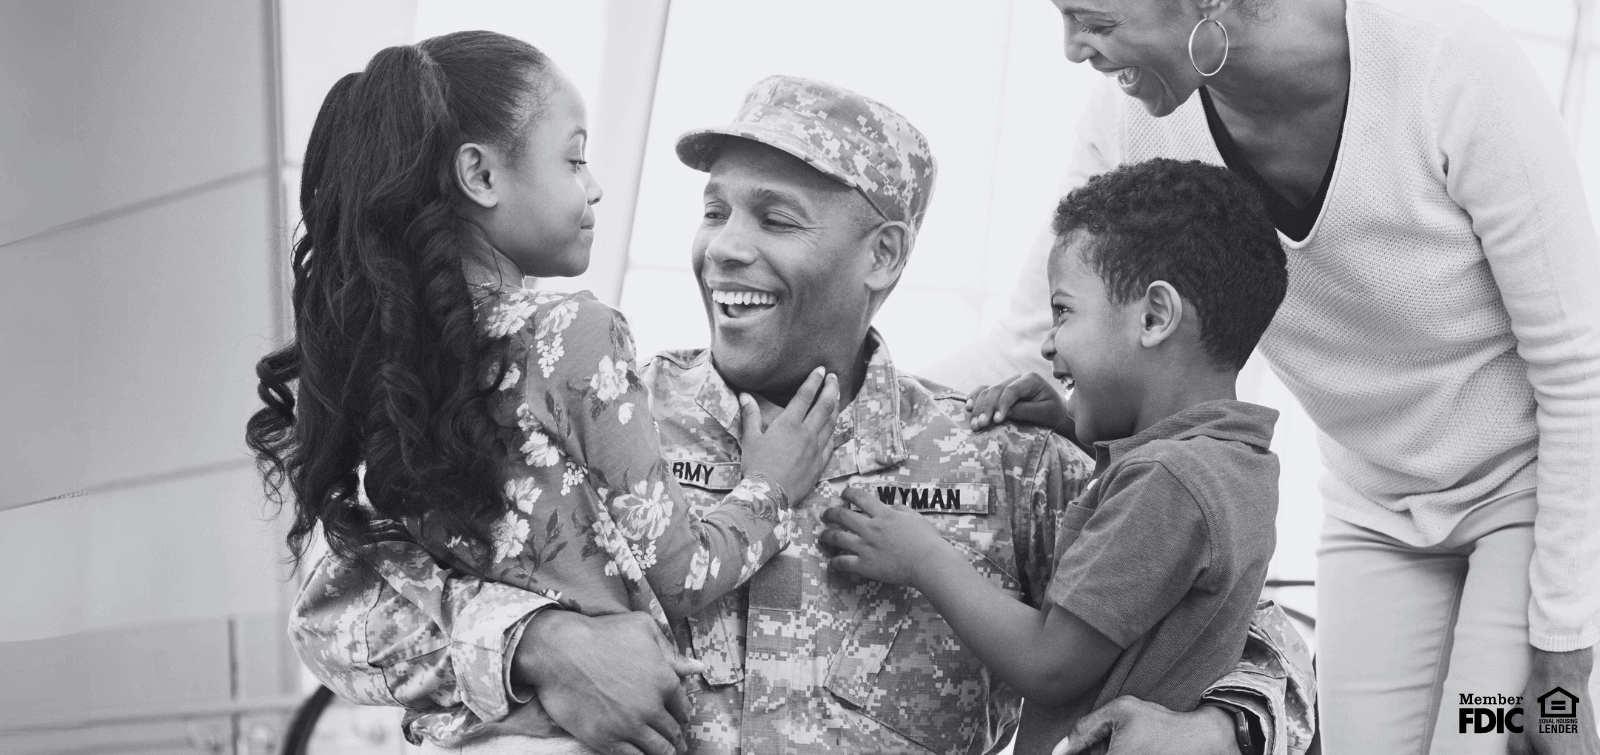 military family spending quality time together